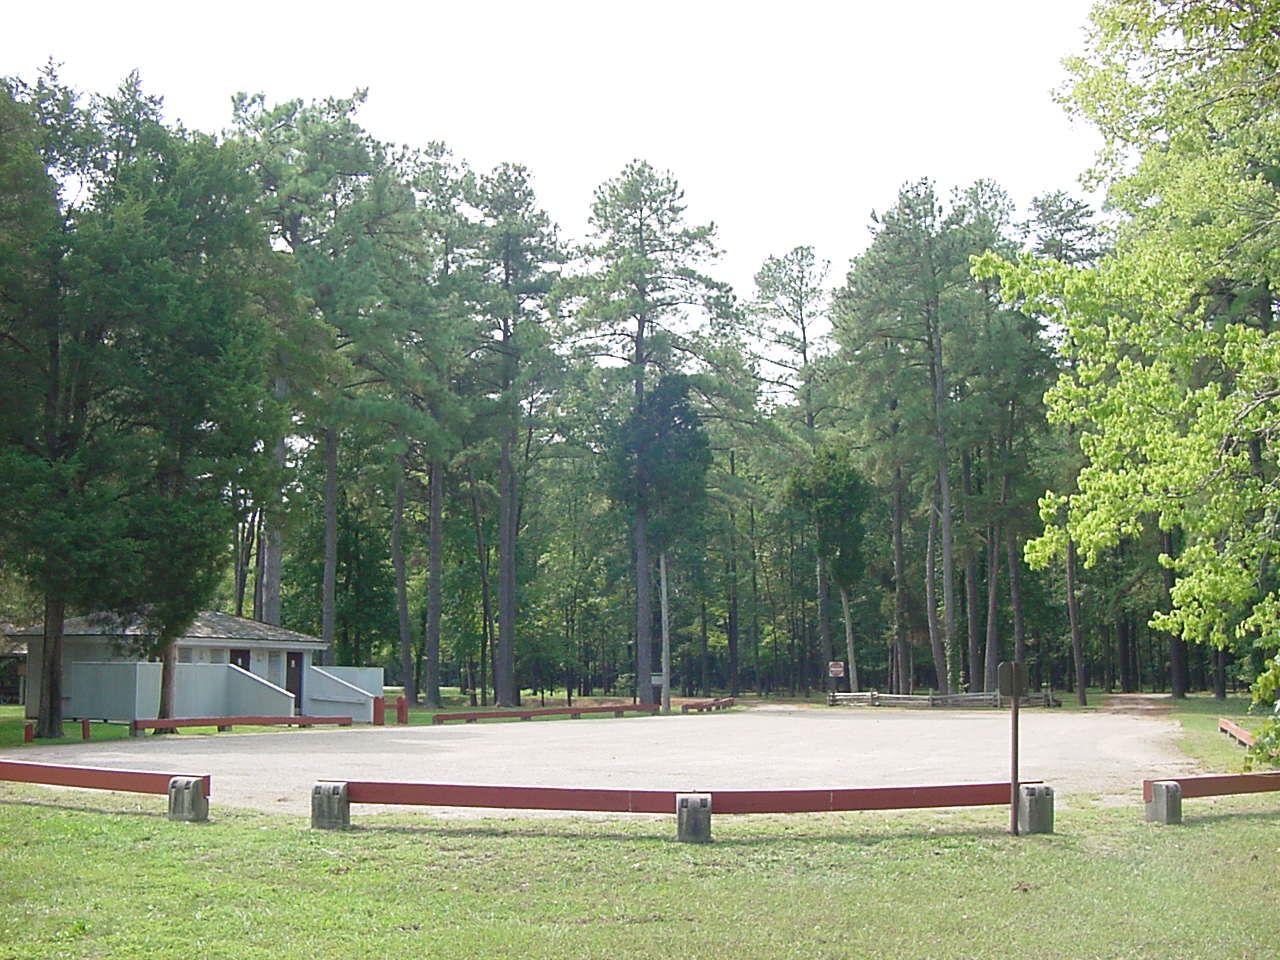 Paved parking lot with horizontal wooden poles to mark boundary. One man, one woman, and one family restroom to the left.